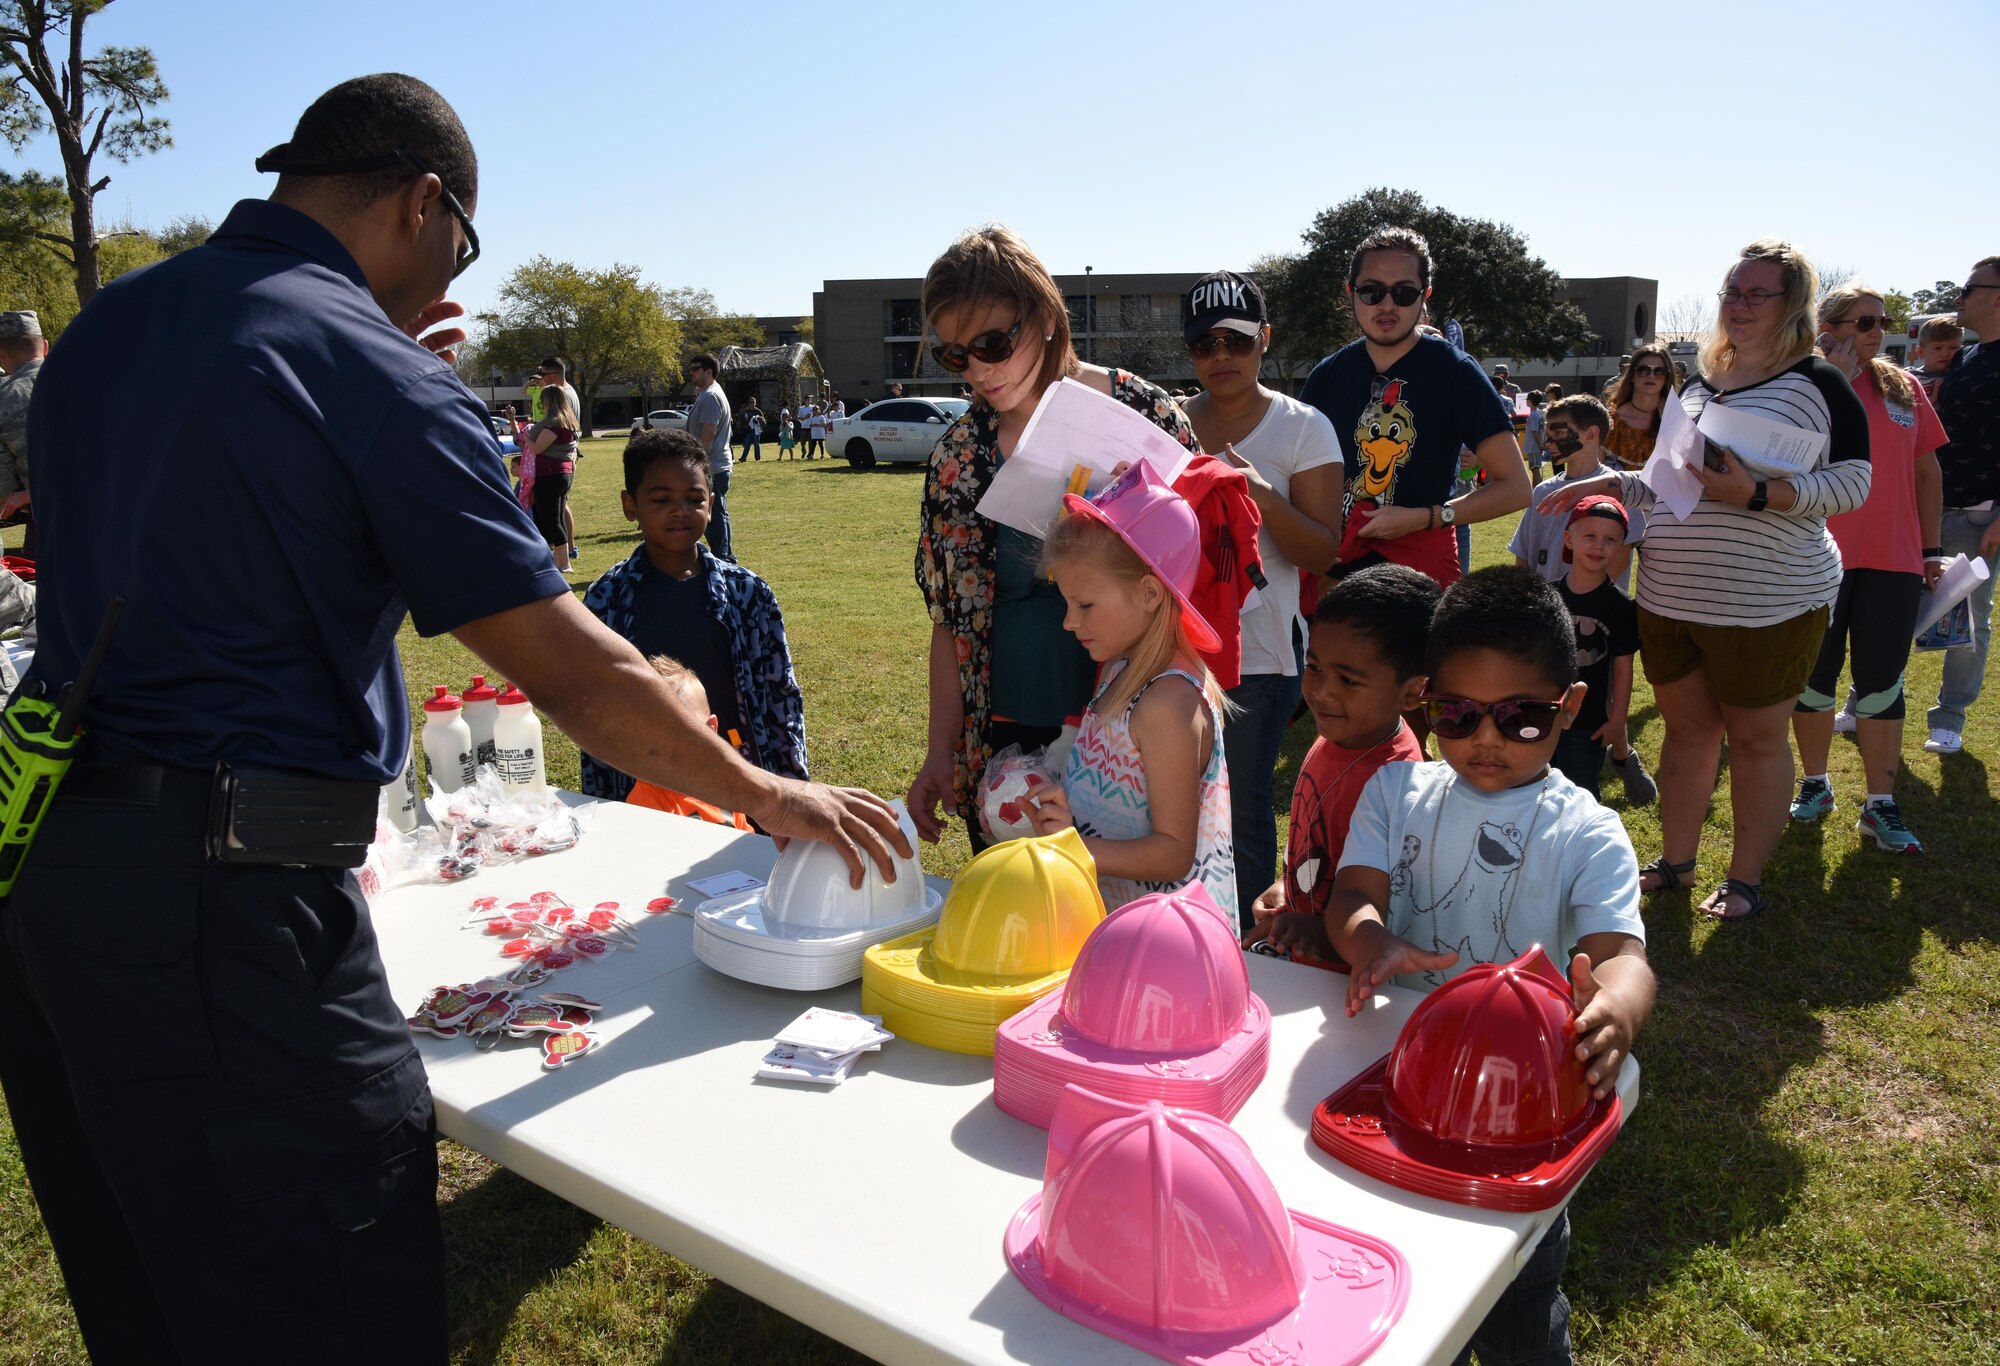 John McIntyre, 81st Infrastructure Division firefighter, provides fire safety instructions and handouts to Keesler families during Operation Hero March 18, 2017, on Keesler Air Force Base, Miss. The activities at the event were designed to help children better understand what their parents do when they deploy. (U.S. Air Force photo by Kemberly Groue)